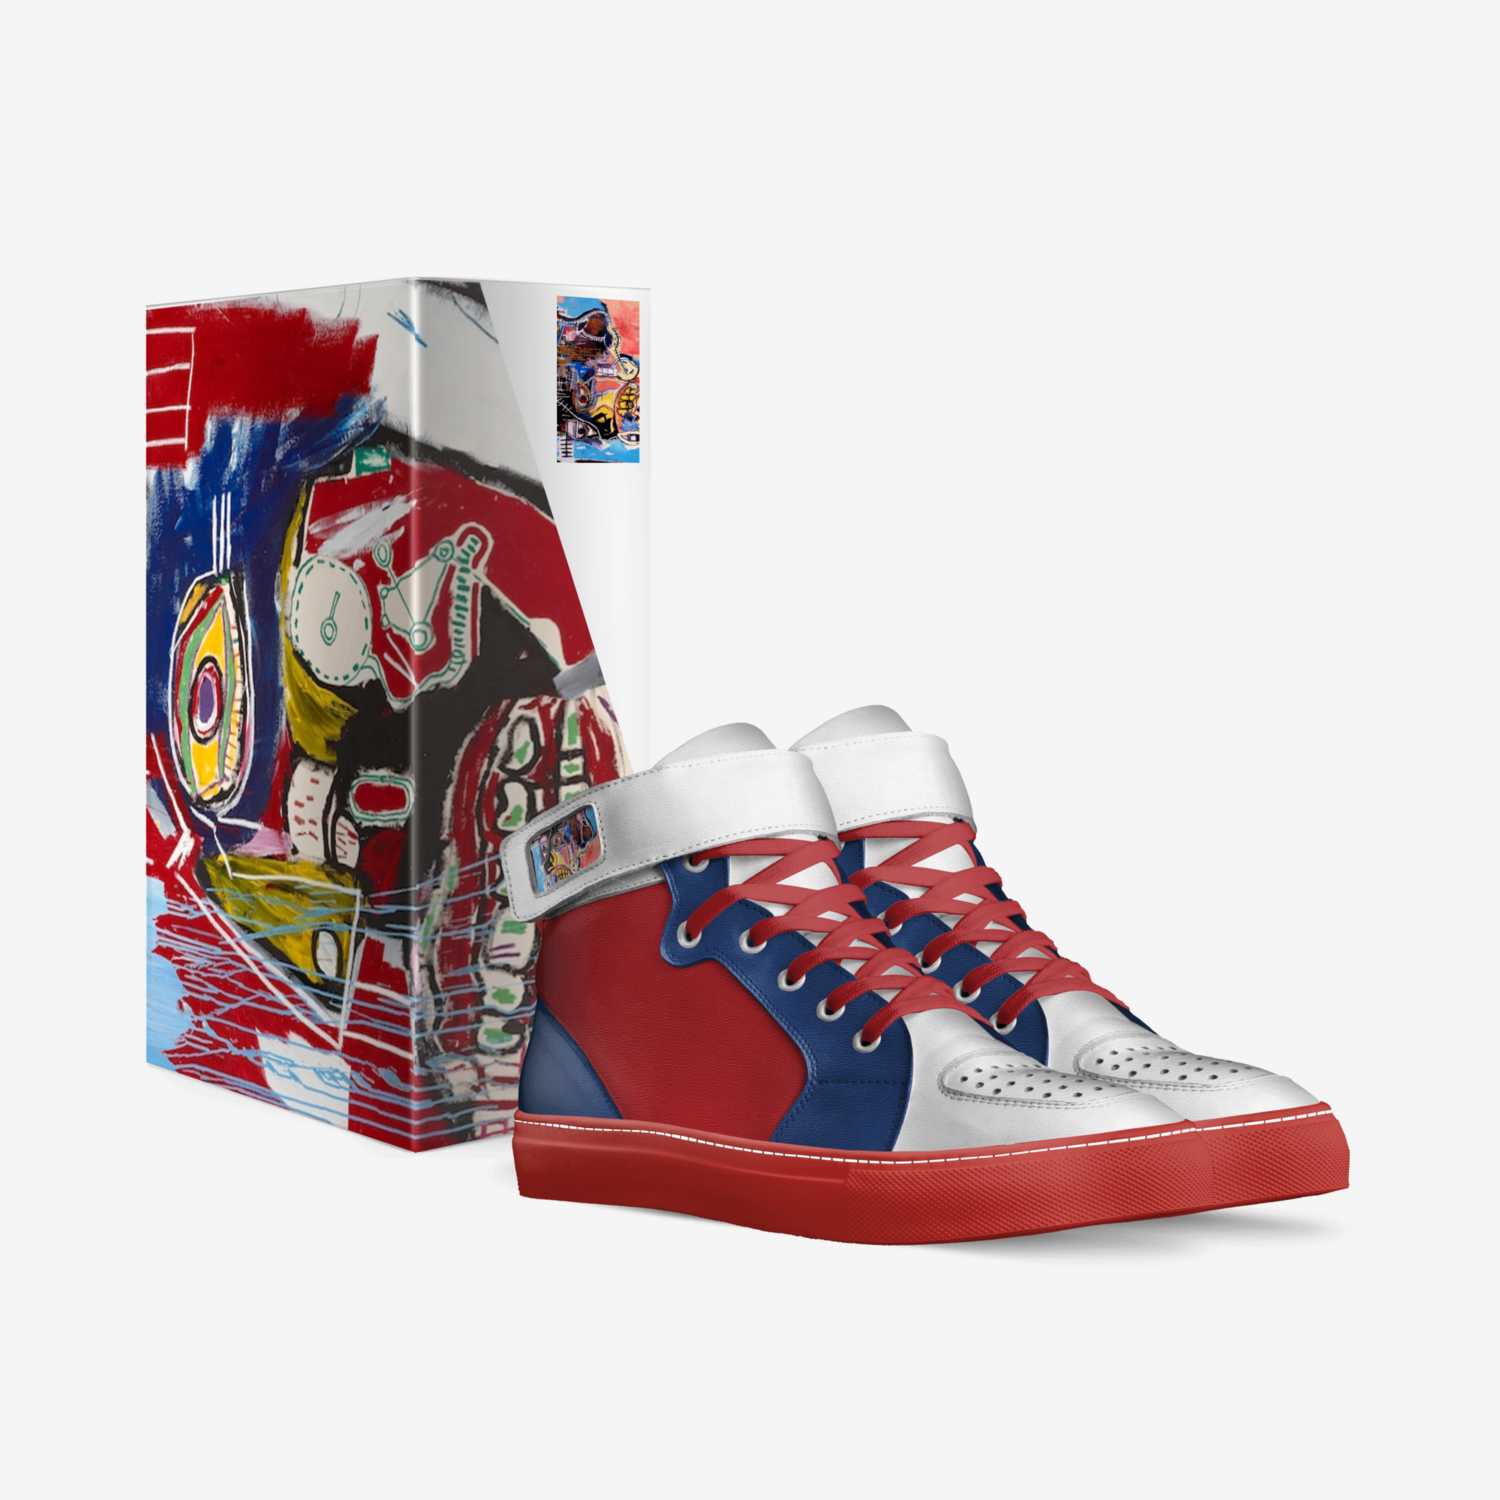 basquiat 3's custom made in Italy shoes by Smb Clothing | Box view